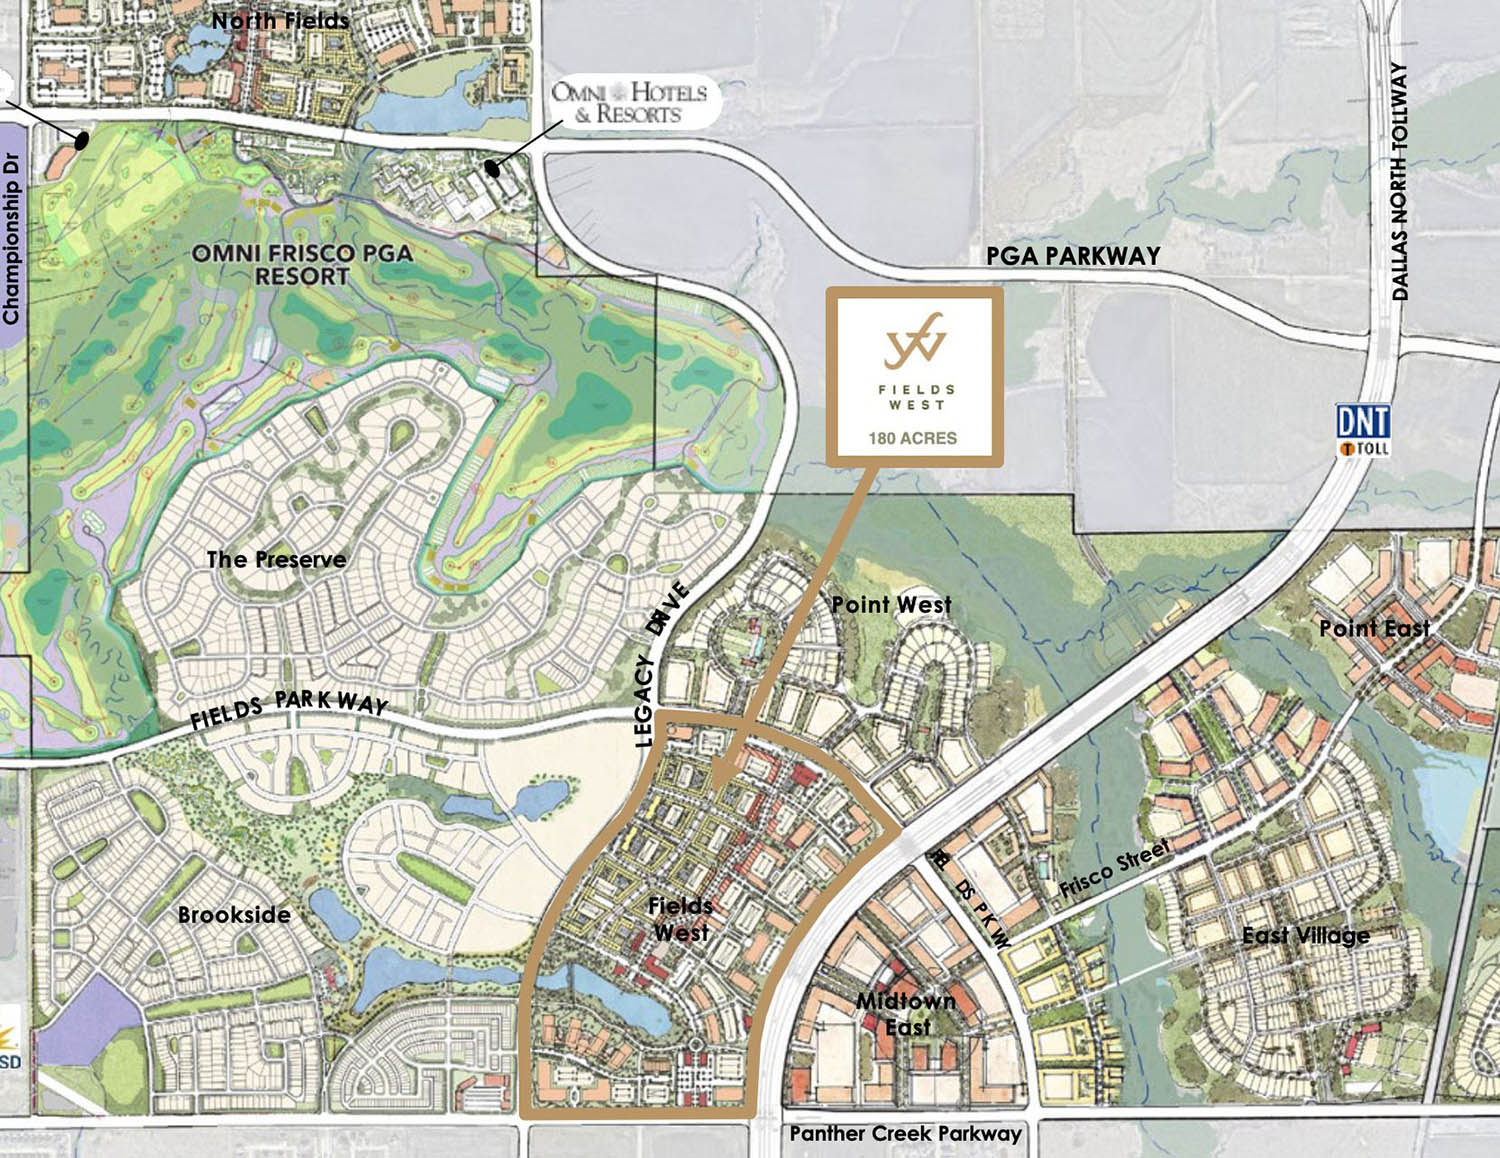 The Fields West project at the tollway and Panther Creek Parkway is part of the larger 2,500-acre Fields development